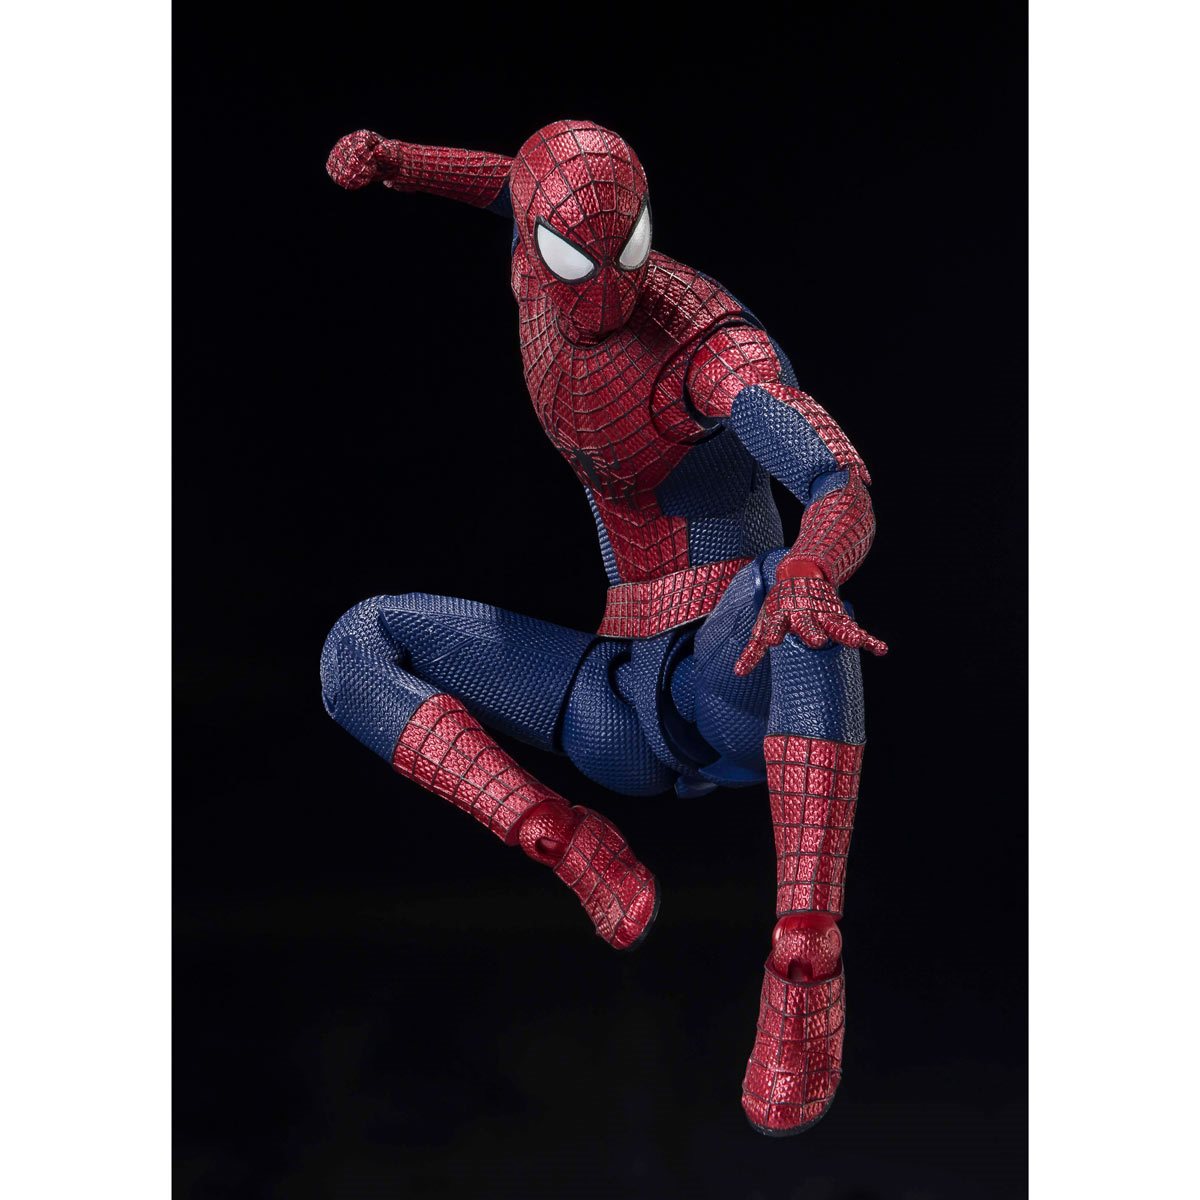 The Amazing Spider-Man Action Figure by SH Figuarts